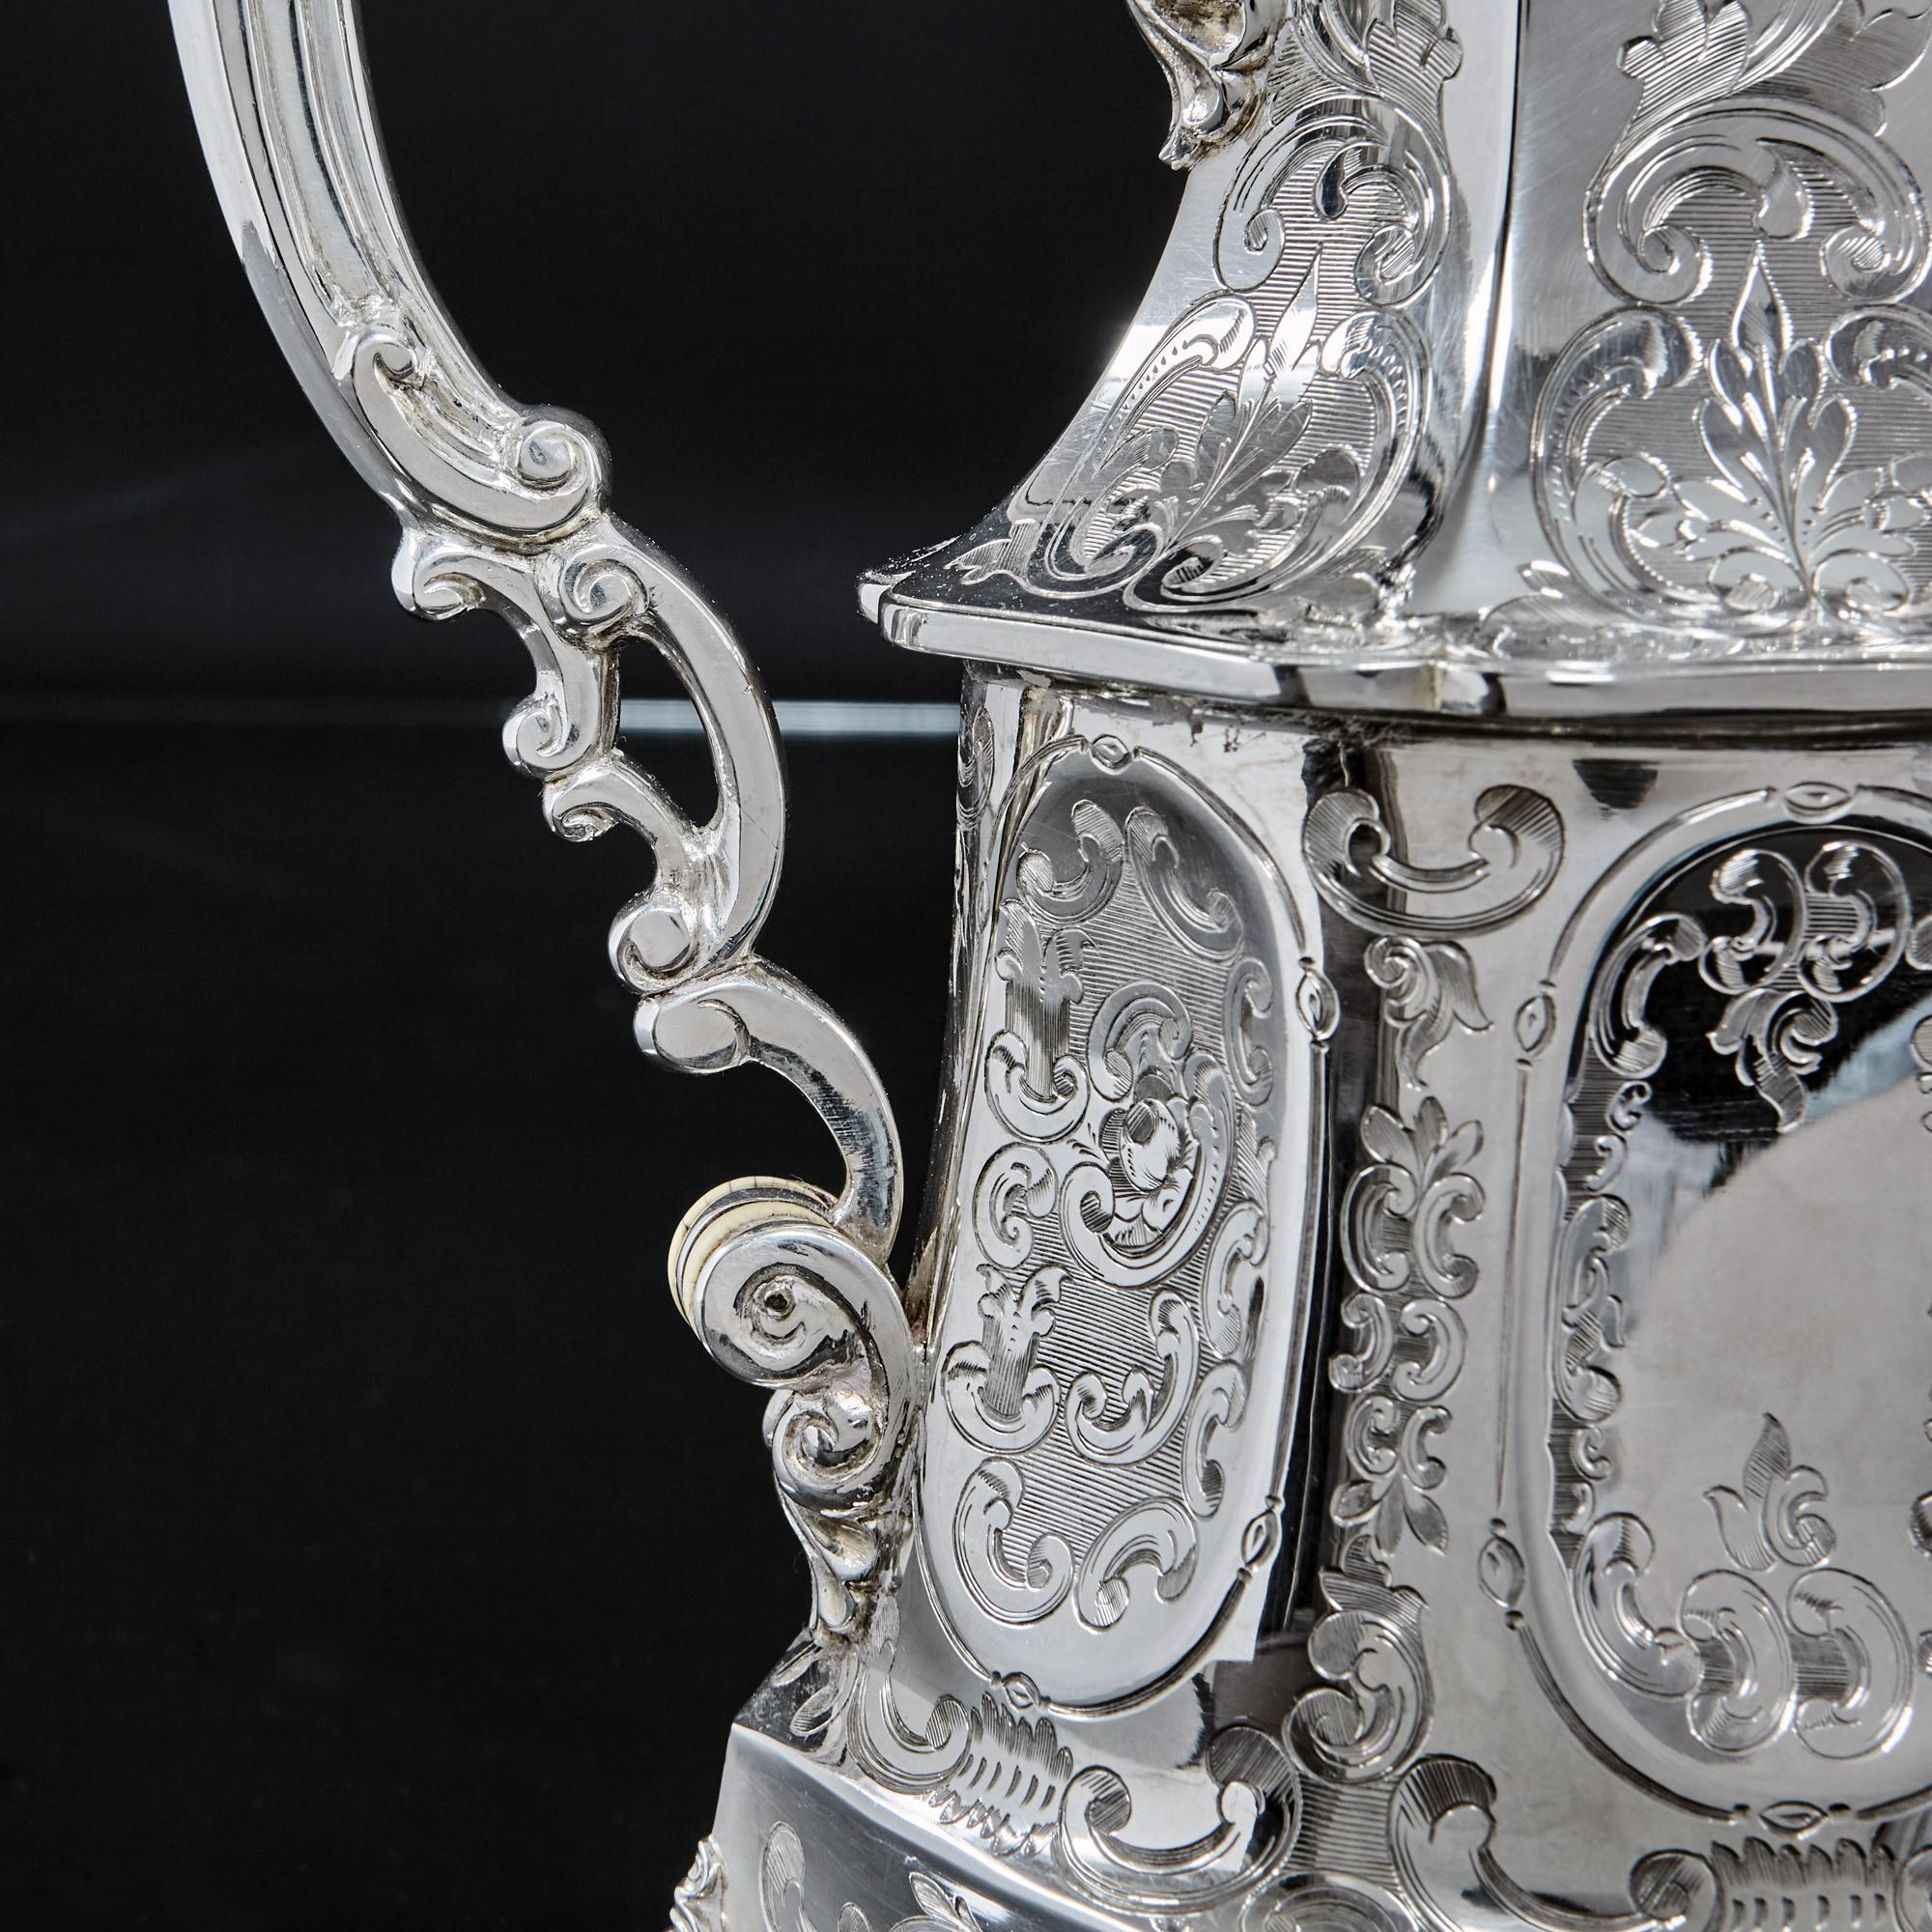 An imposing handmade antique silver tea and coffee set, comprising silver teapot, coffee pot, sugar bowl and milk jug, all hand engraved with fine detail and epitomising the exuberance of the mid-Victorian era and the influences of the